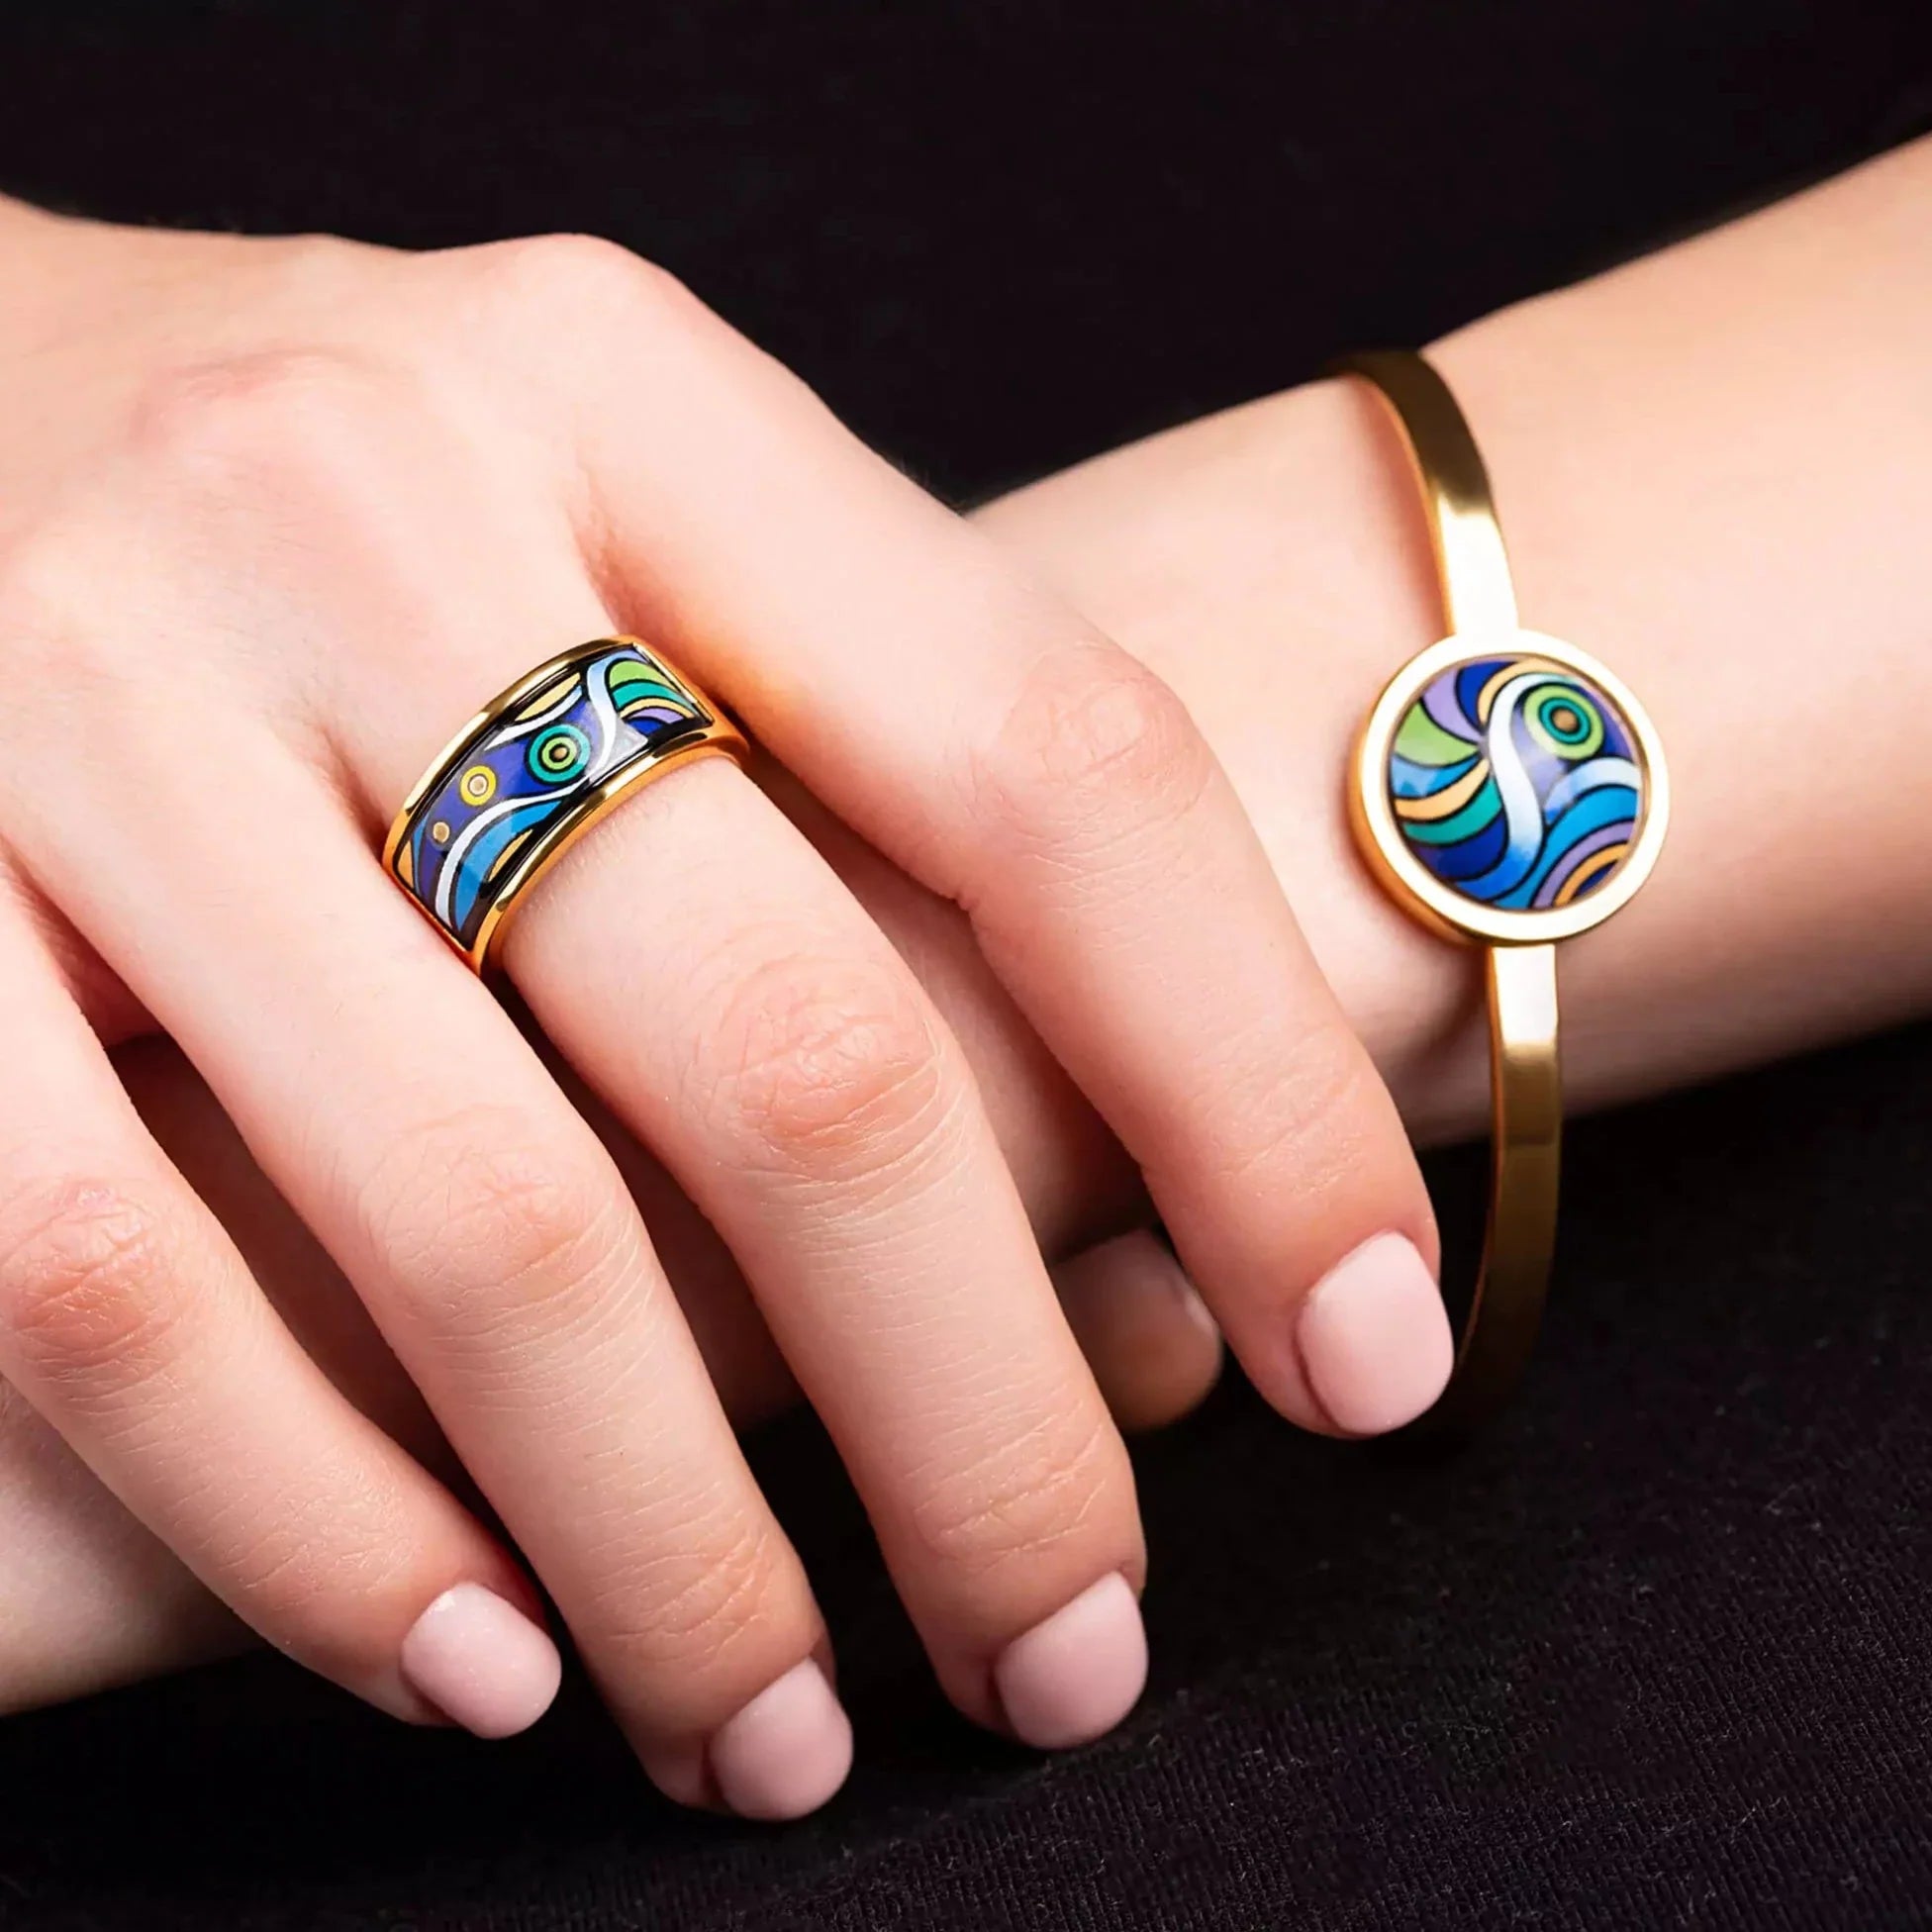 Yellow gold bracelet and yellow gold ring with a round painting of Van Gogh's "Starry Night" in a center. Jewelry is on a woman's hands